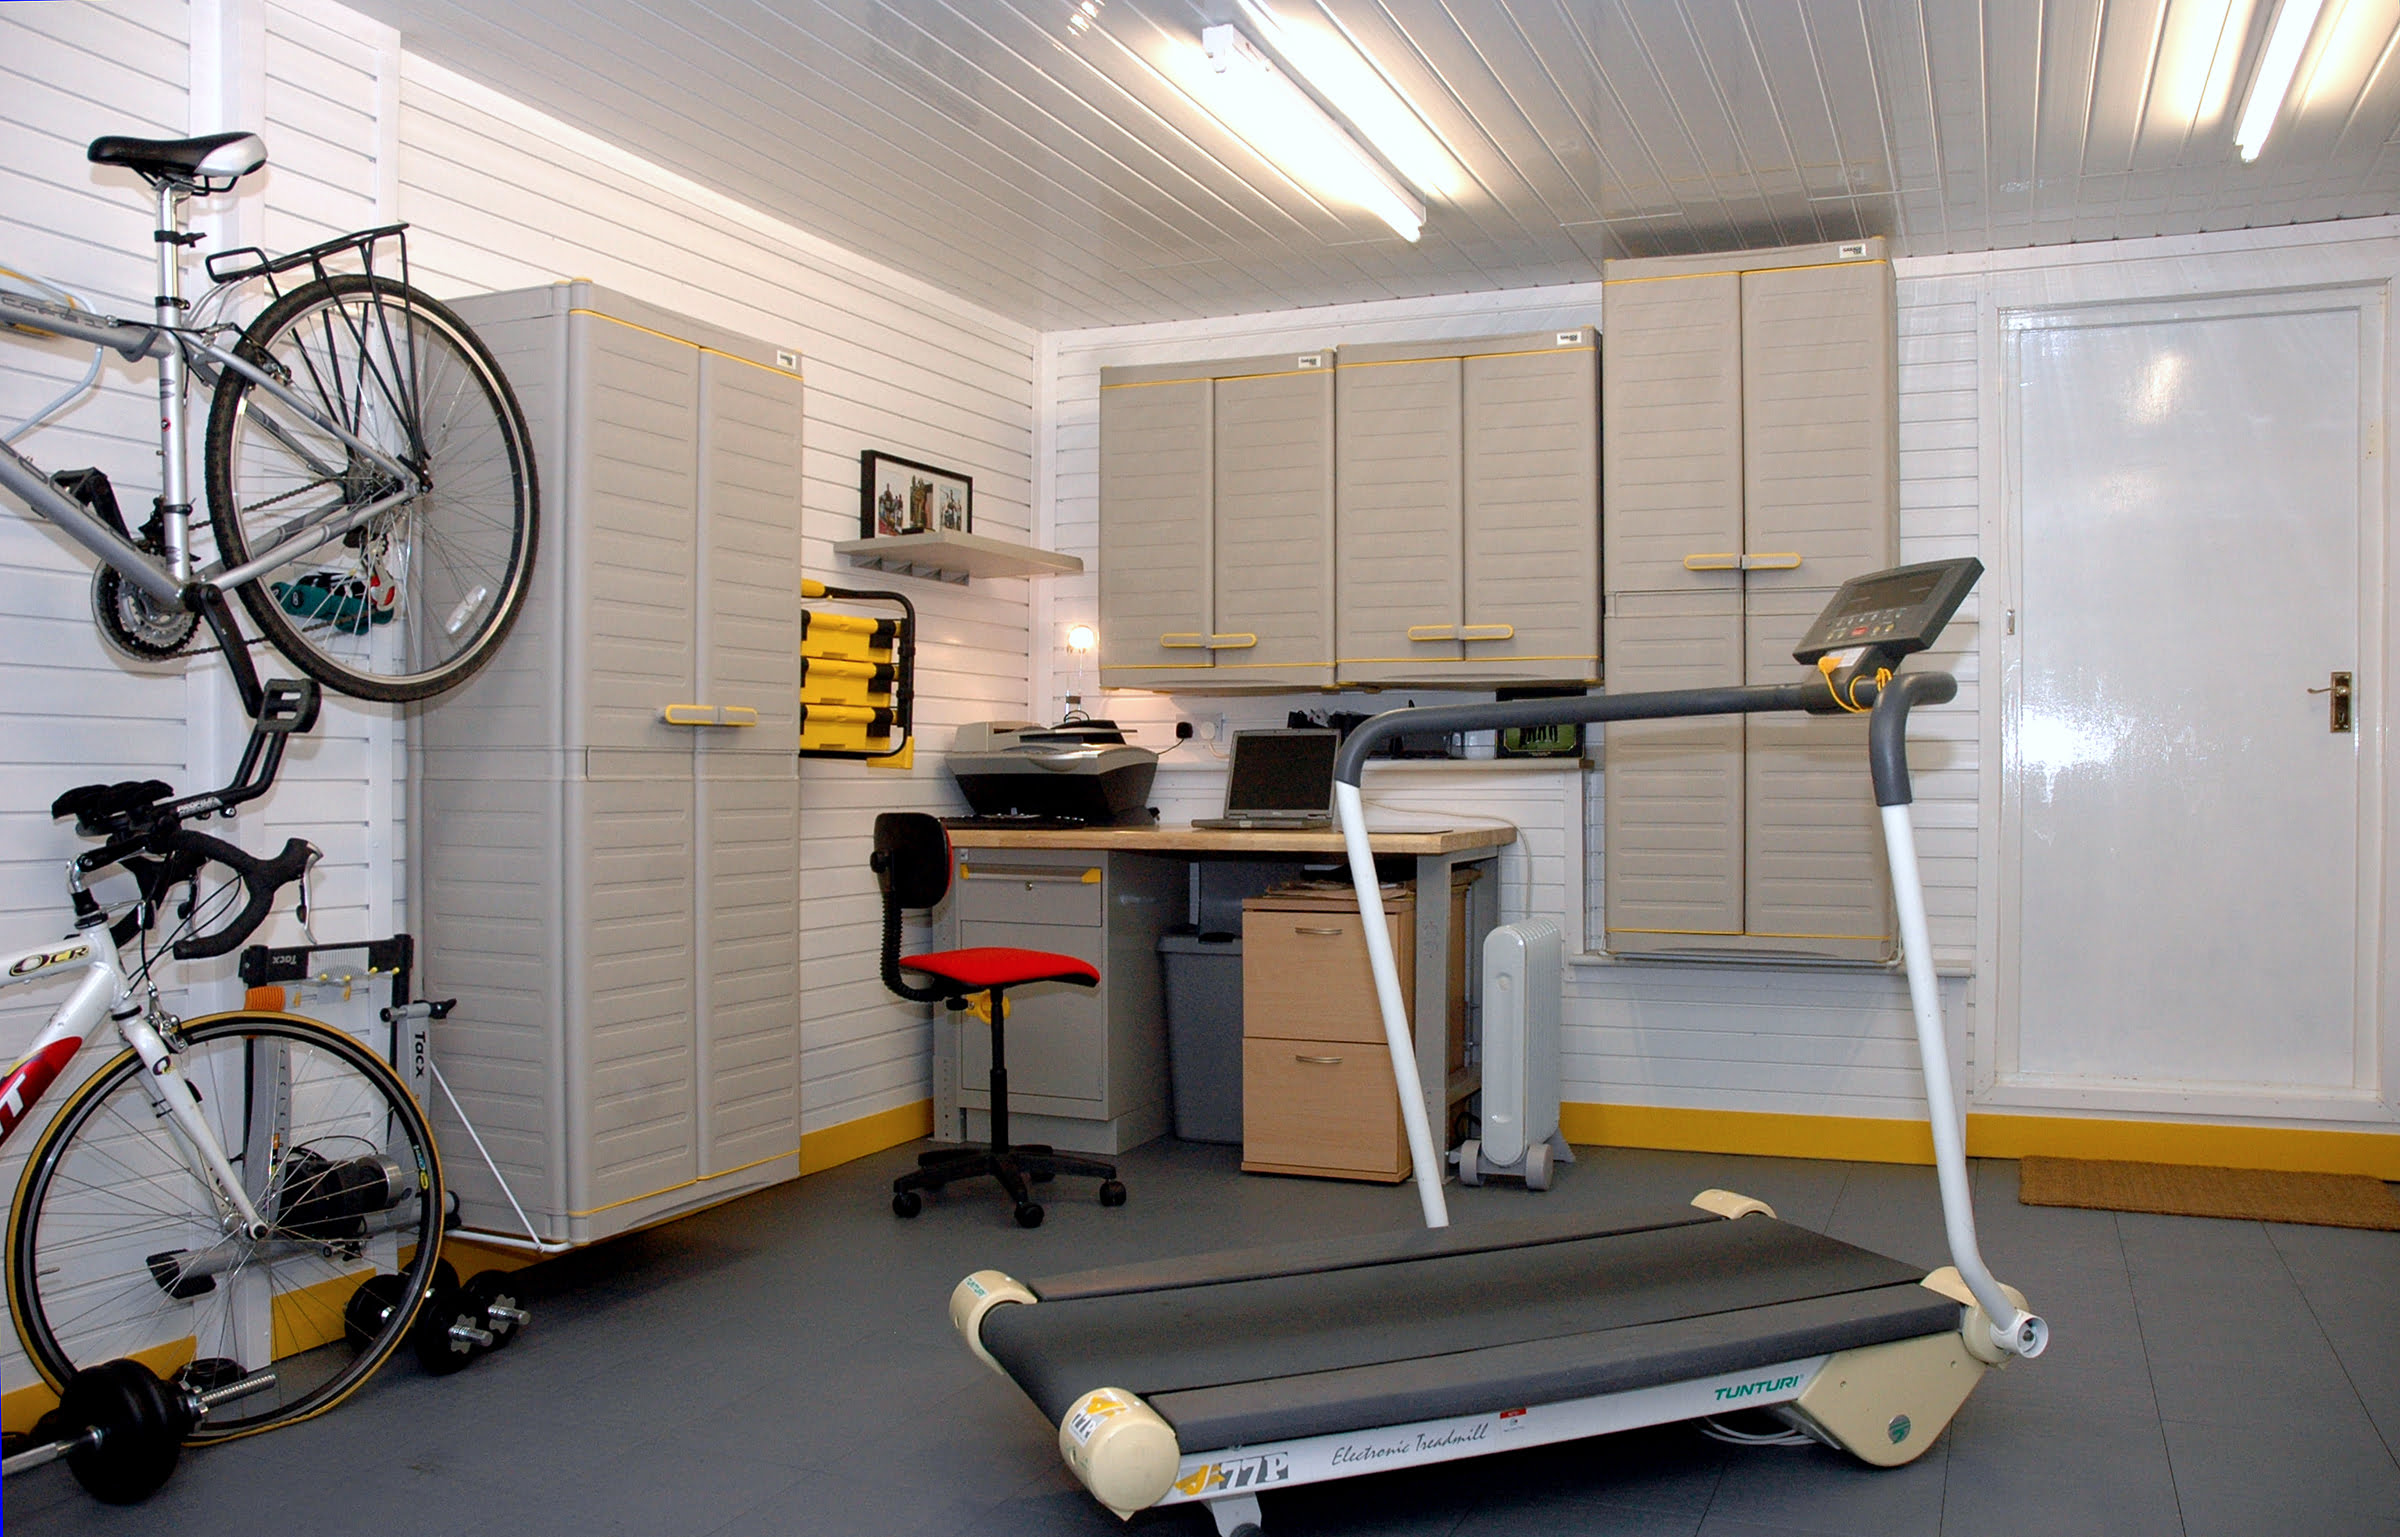 Home Office in your Garage